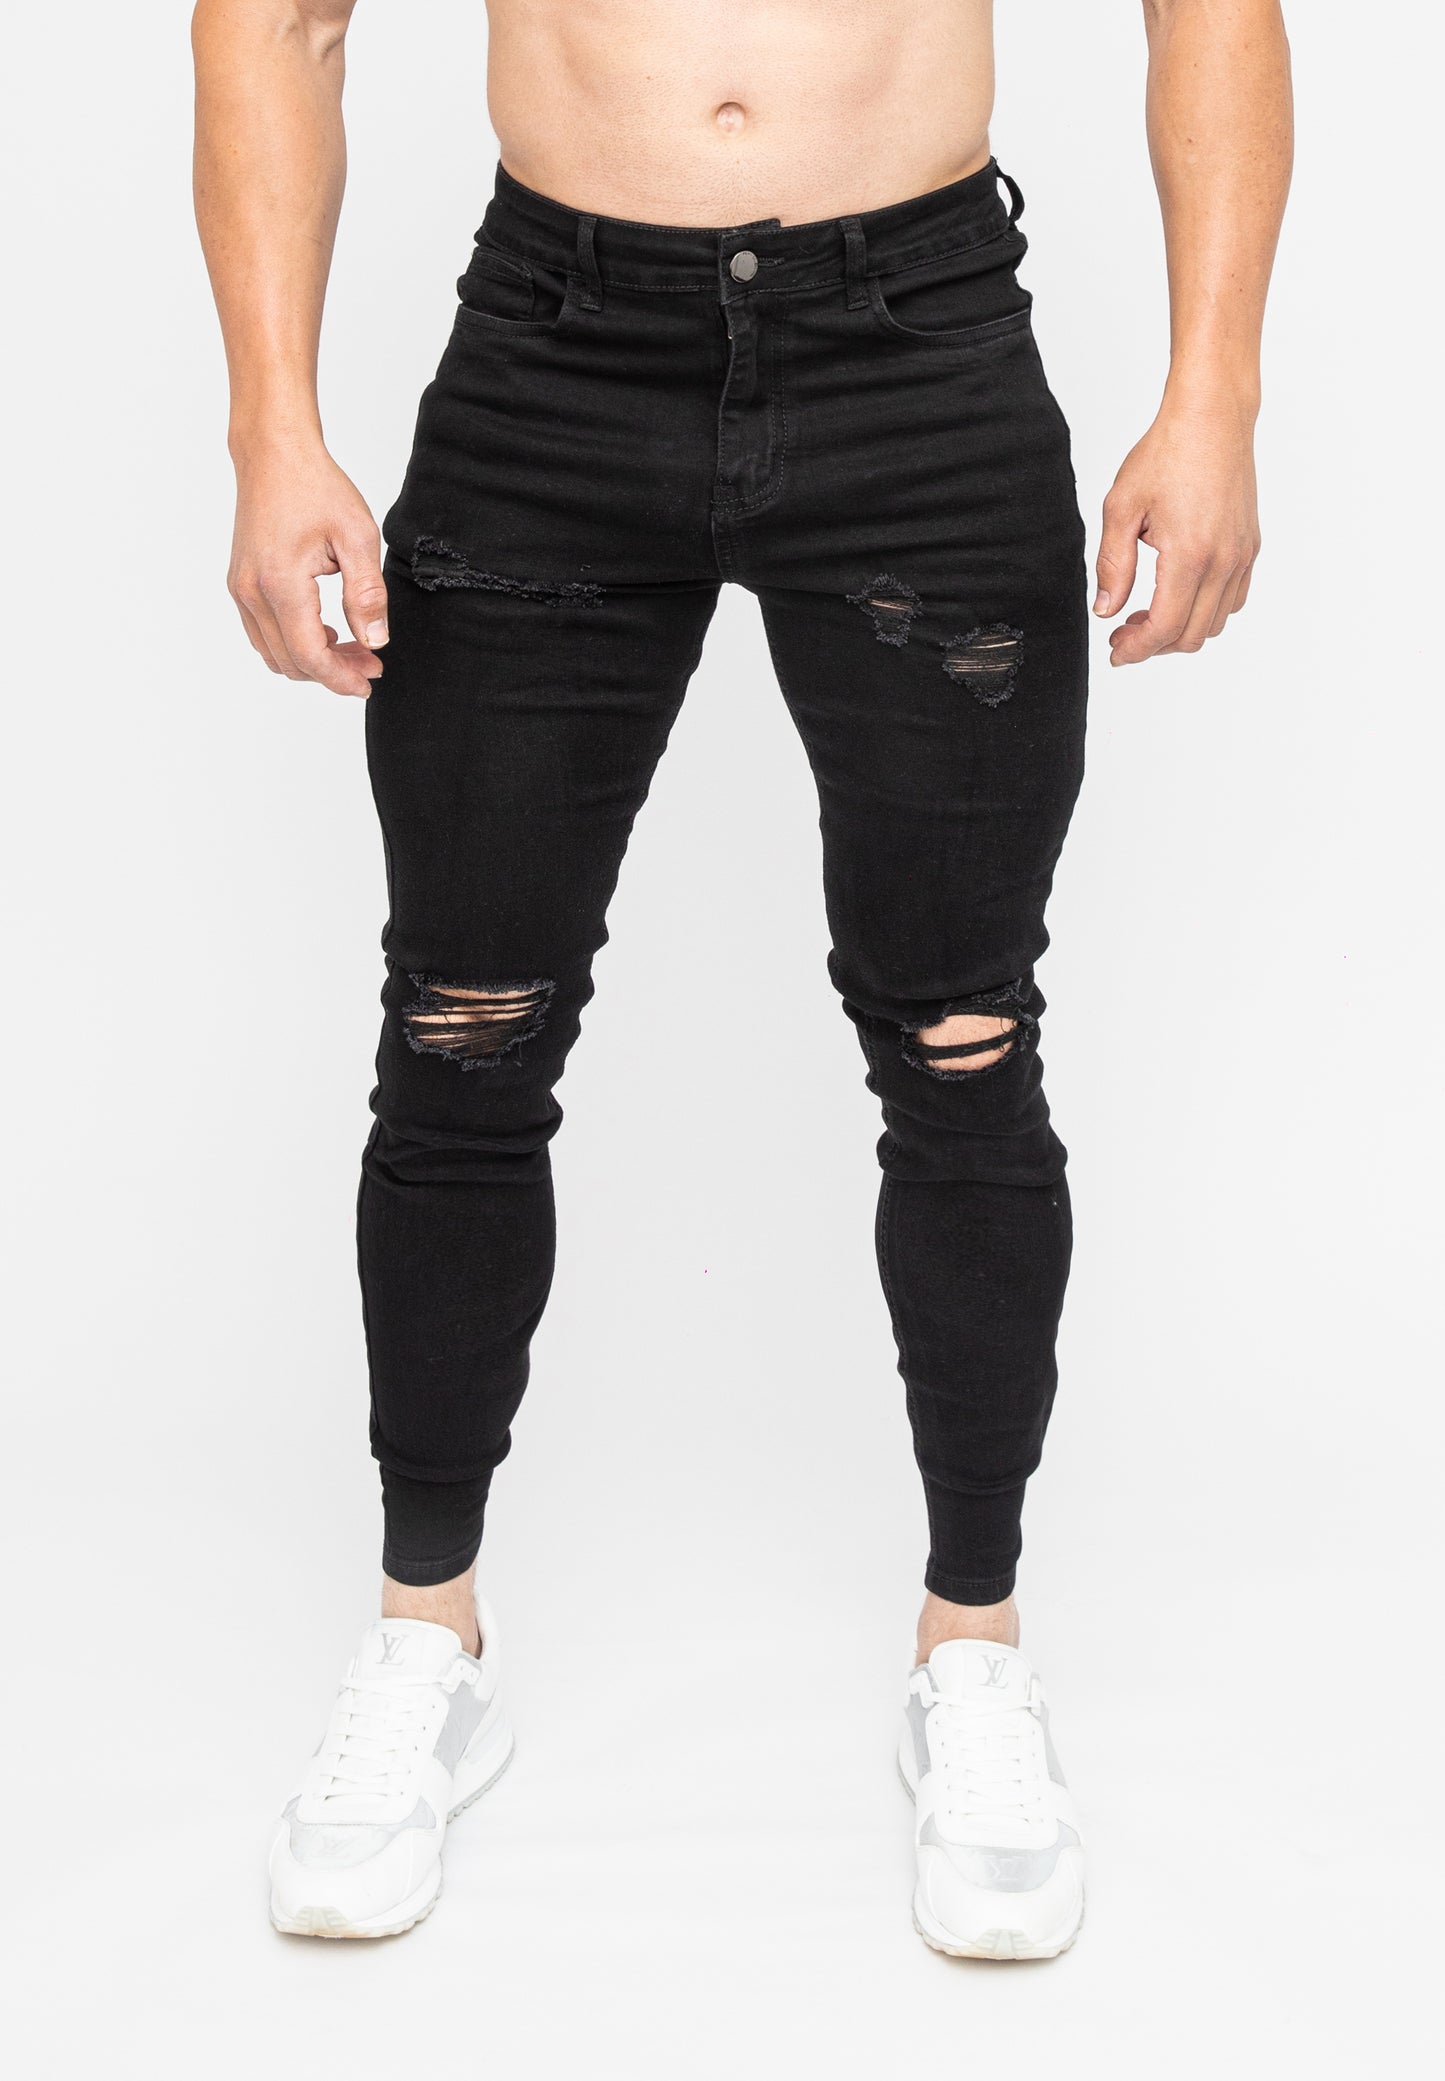 Black Ripped Slim Fit Jeans, Jeans